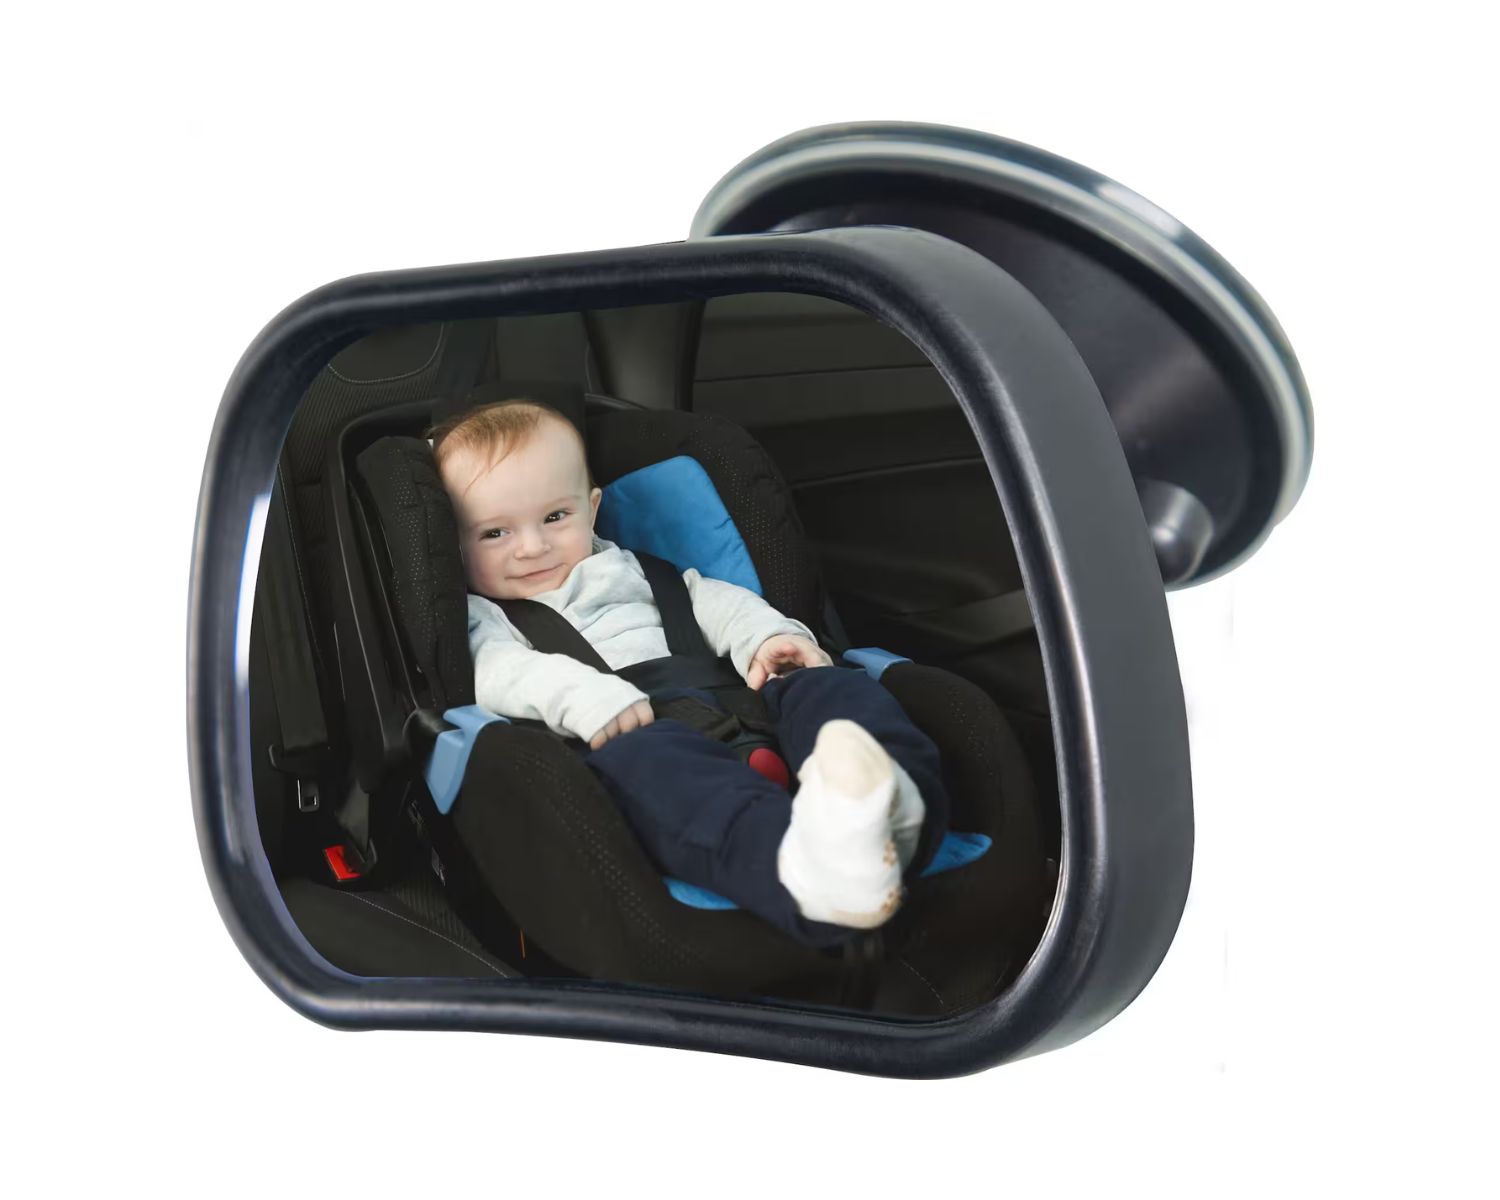 Review: Baby Car Mirror – No Headrest Needed